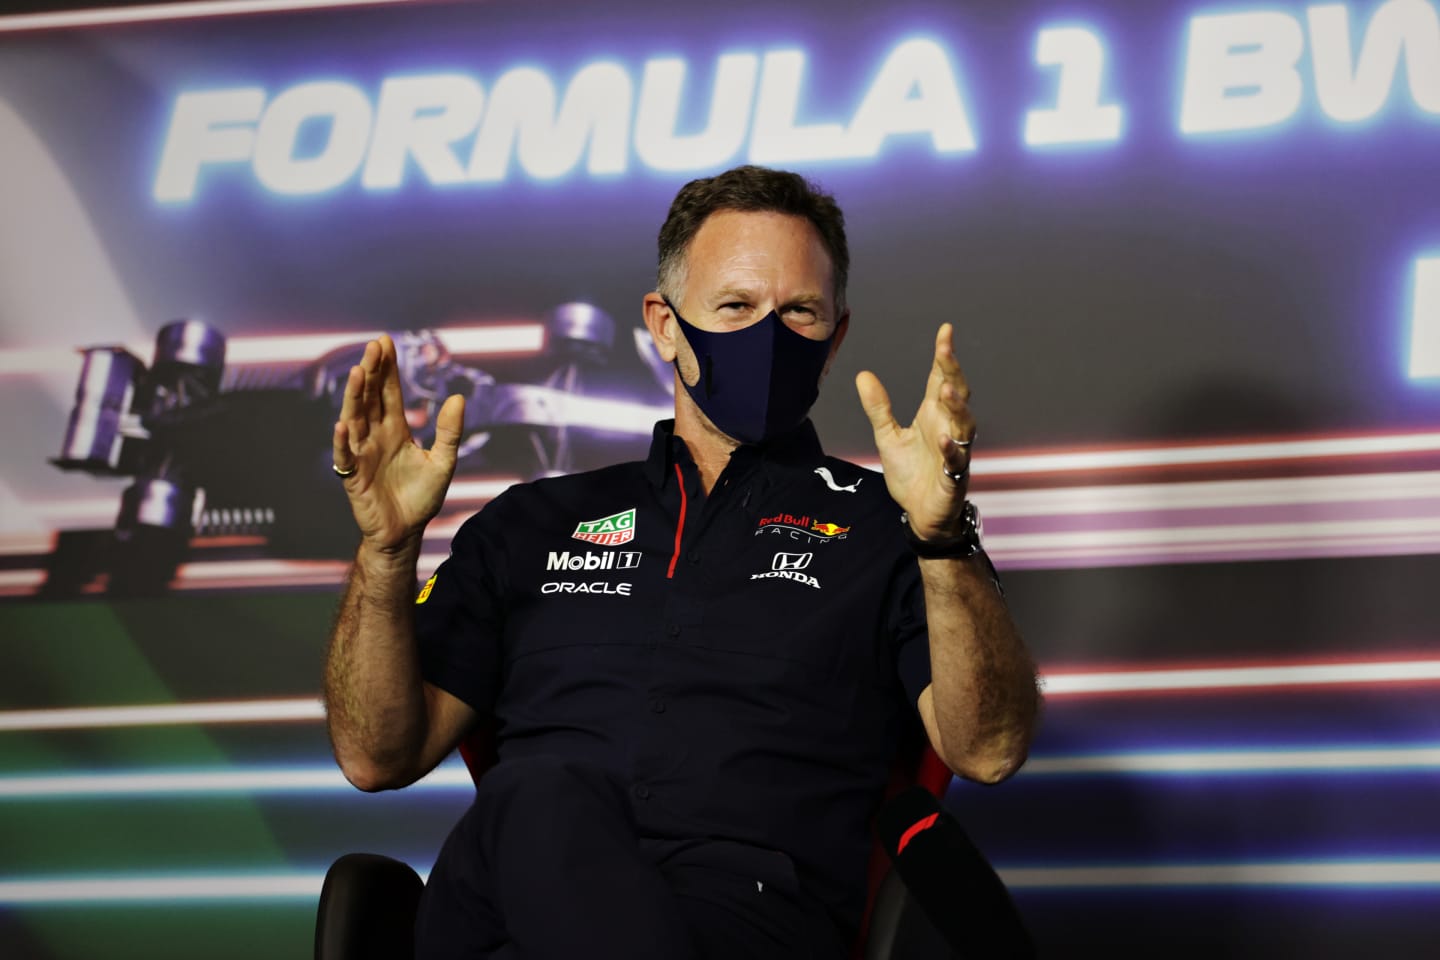 SPIELBERG, AUSTRIA - JUNE 25: Red Bull Racing Team Principal Christian Horner talks in a press conference  during practice ahead of the F1 Grand Prix of Styria at Red Bull Ring on June 25, 2021 in Spielberg, Austria. (Photo by Bryn Lennon/Getty Images)